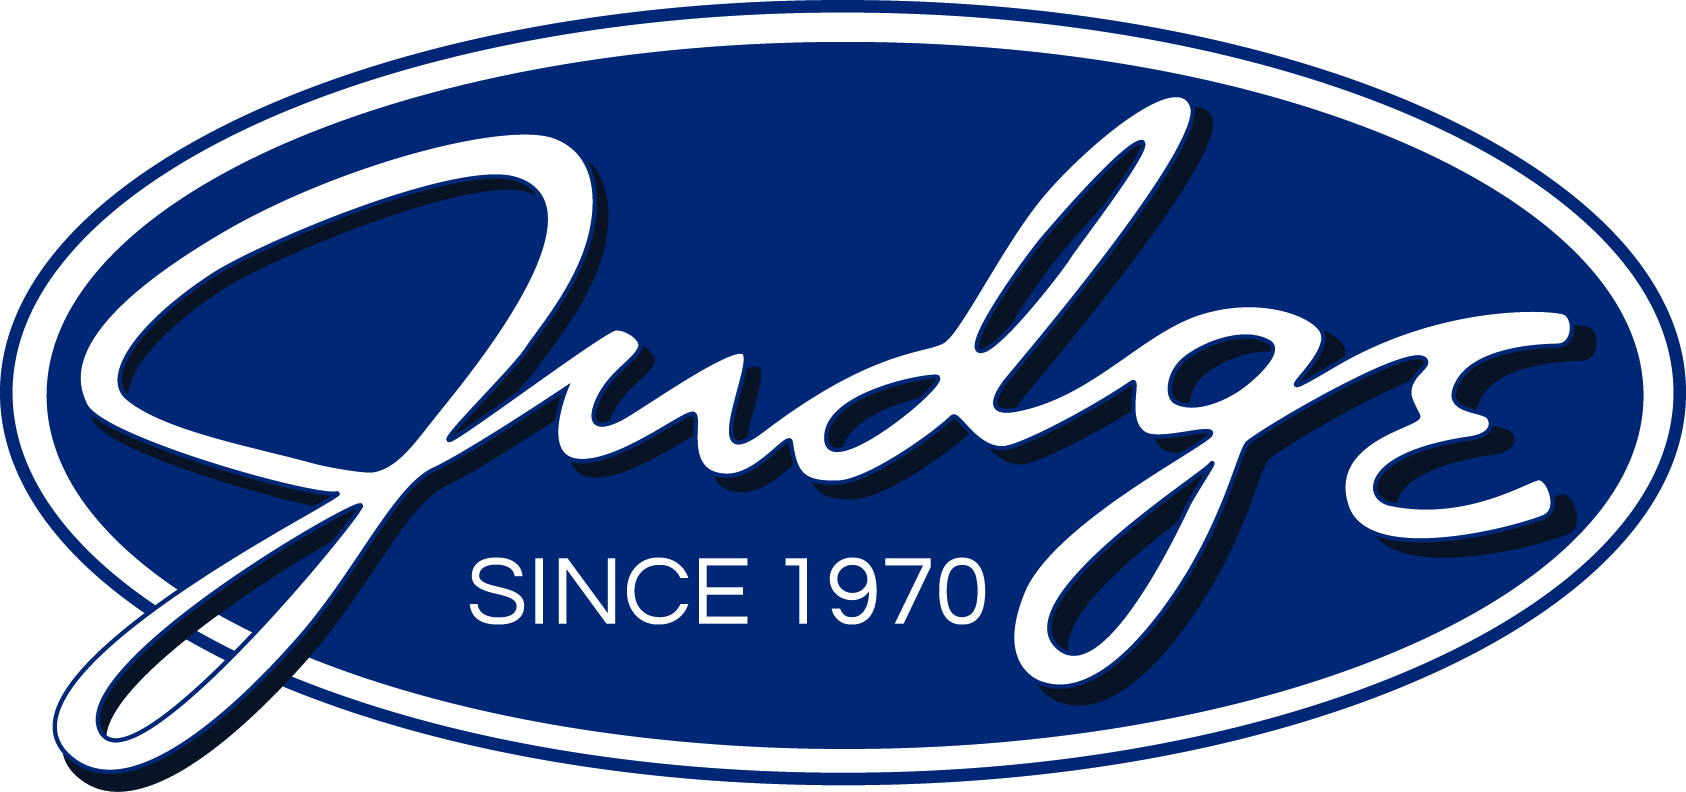 Judge logo in blue and white. Text under the word Judge reads "Since 1970" in a smaller font.